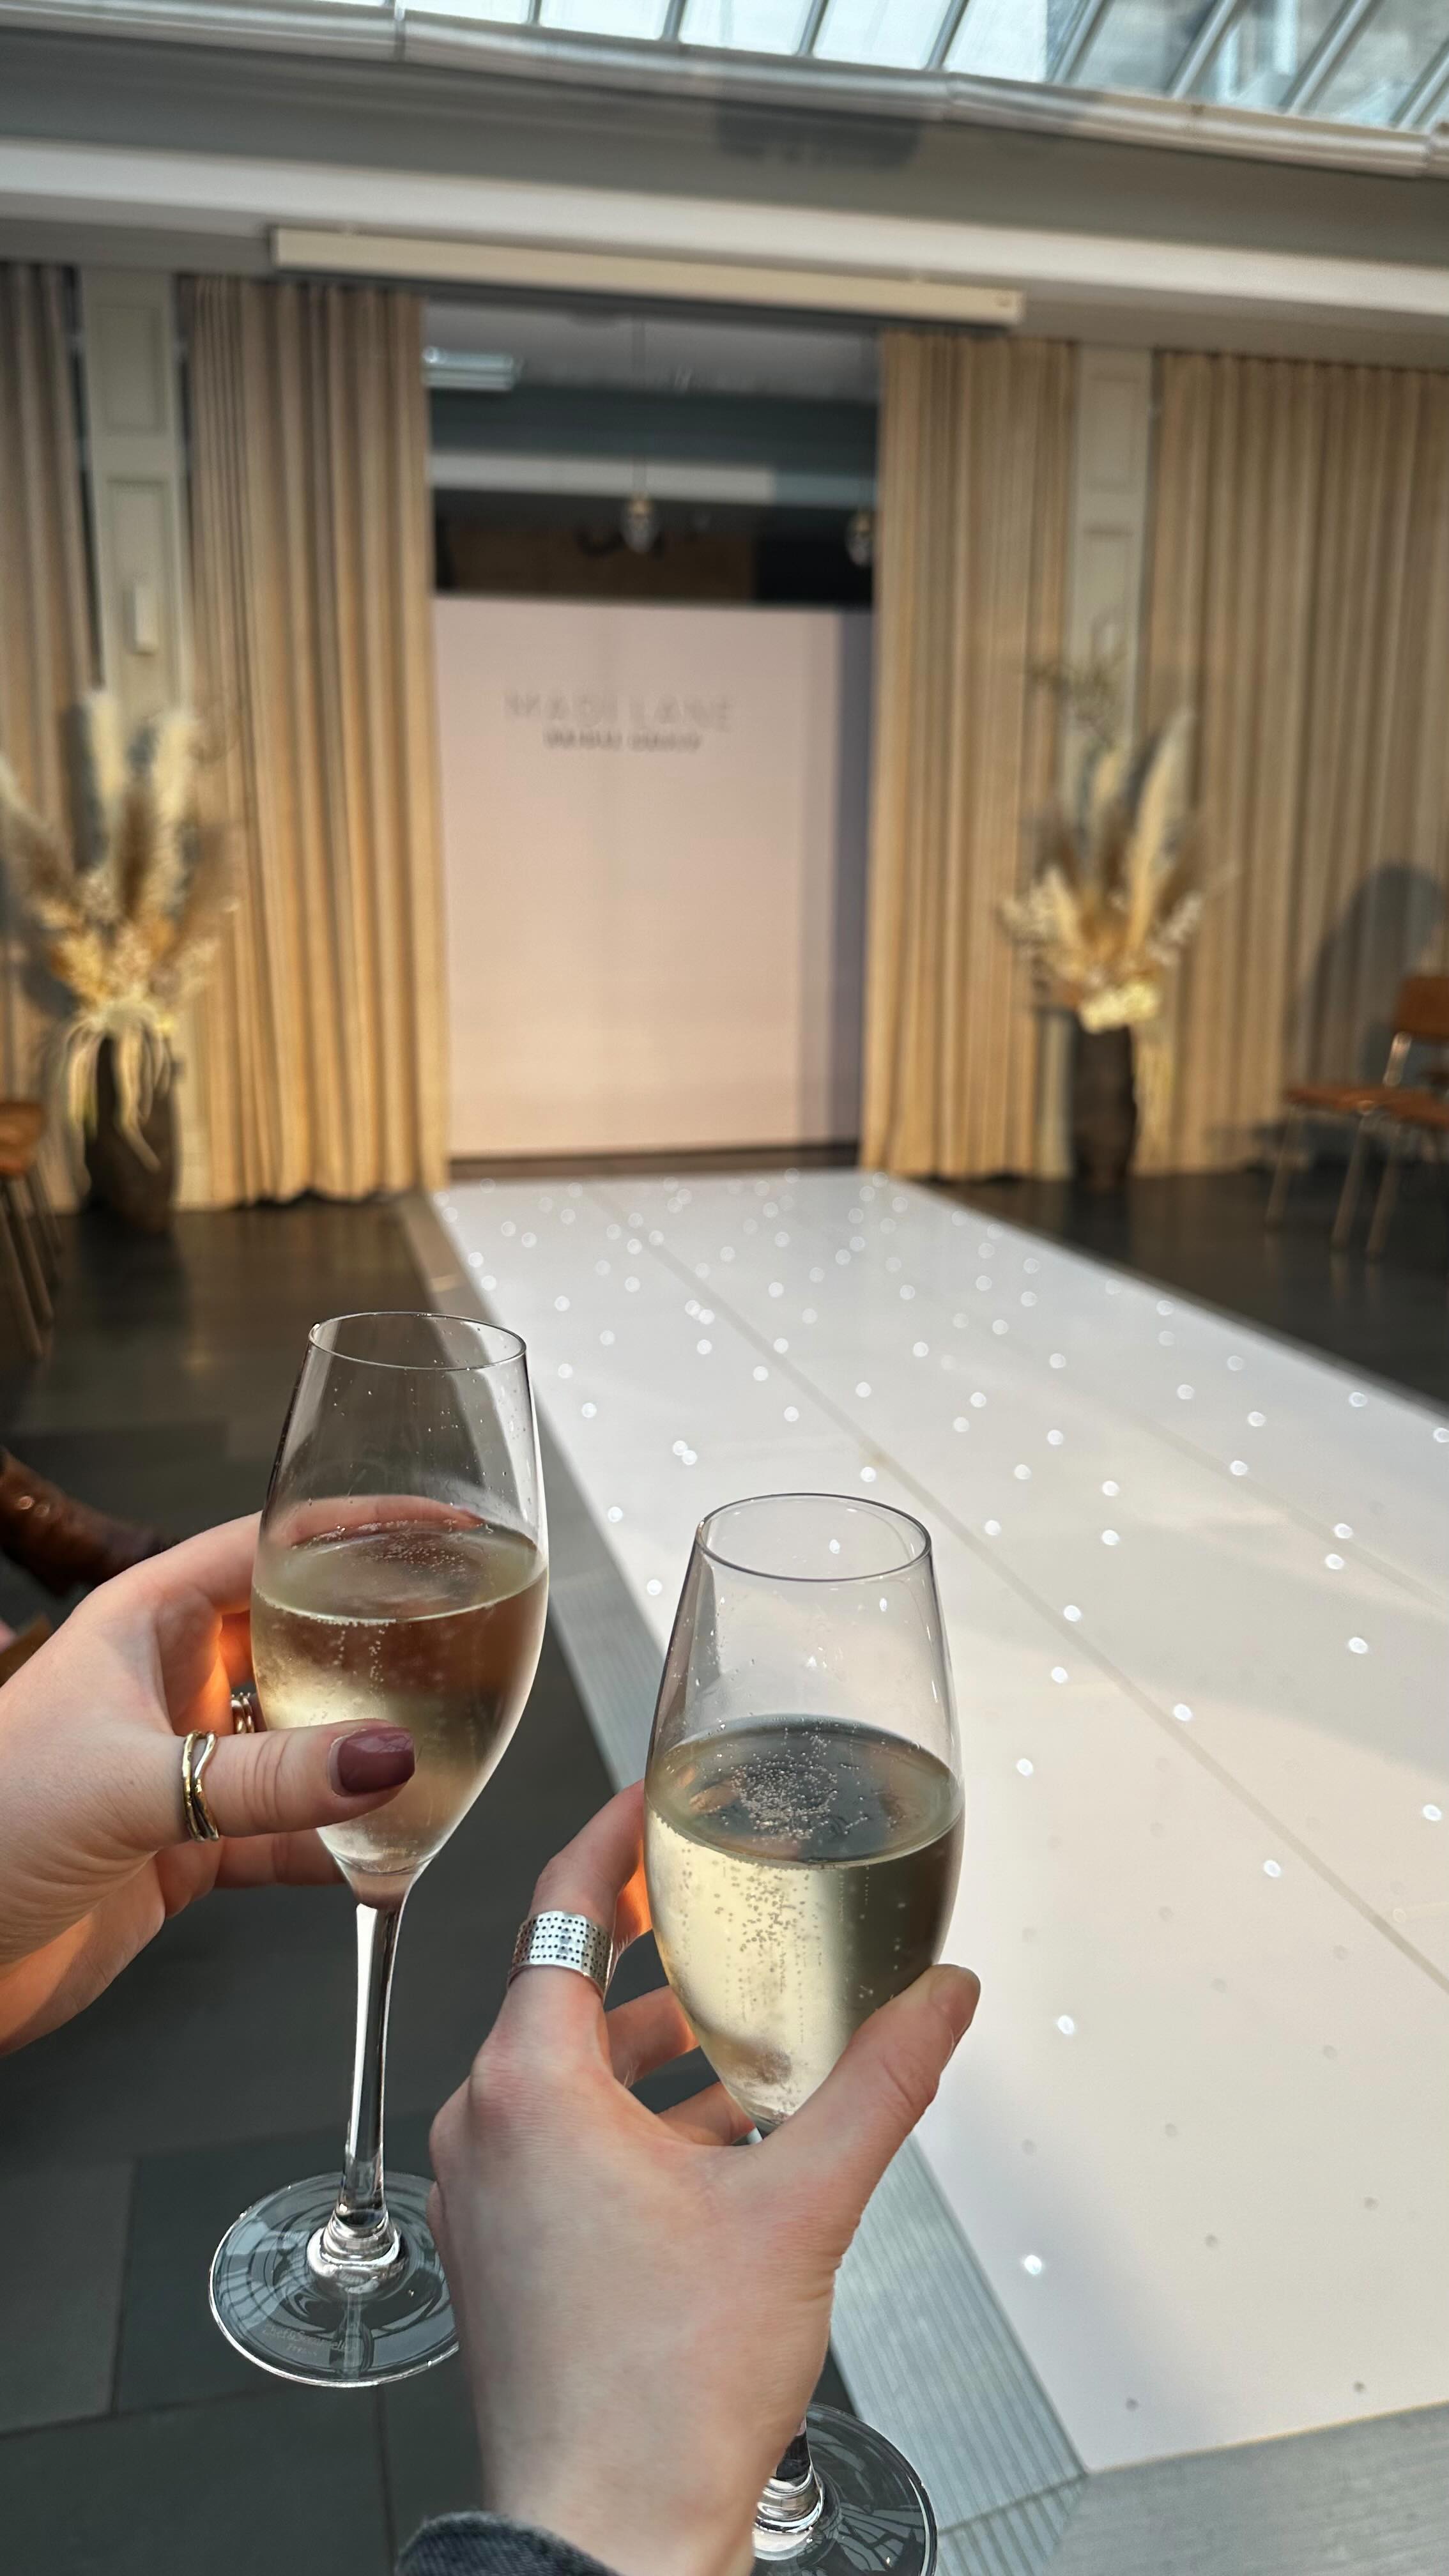 Choosing the dreamiest AW2024 styles by @madilanebridal & @jeune_bridal this week at the beautiful setting of @hamptonmanor has been such a highlight of our year so far ◊Danni & Ruthy have travelled the length of the country (or what felt like it) for the first #MLBGFASHIONWEEK - where Team Madi hosted the most incredible 3 day event, featuring catwalk shows, beautifully styled spaces to take in the new styles, feasting tables in tipi’s, brand focus groups with Designer Liz, a special dinner at @smoke_hamptonmanor , catch ups with our bridal pals, bread making classes @bakery_hamptonmanor , wine tasting & of course handpicking the most exquisite styles to join our boutique rails this Autumn ◊Huge thank you to @lizyoung_bridaldesigner & Team Madi for an amazing event - we’ve loved every minute ◊We’re so excited to announce more on these incredible wedding dresses & which ones we’ve chosen for you all so keep your eyes peeled - for now here’s a sneak BTS look at everything we’ve been up to ◊#bridallife #bridalstylist #madilanebridal #hamptonmanor #jeunebridal #designerbridalwear #aw24 #designerweddingdress #sneakpreview #behindthescenes #youarepreciousbridal #loveabovecurvebridallounge